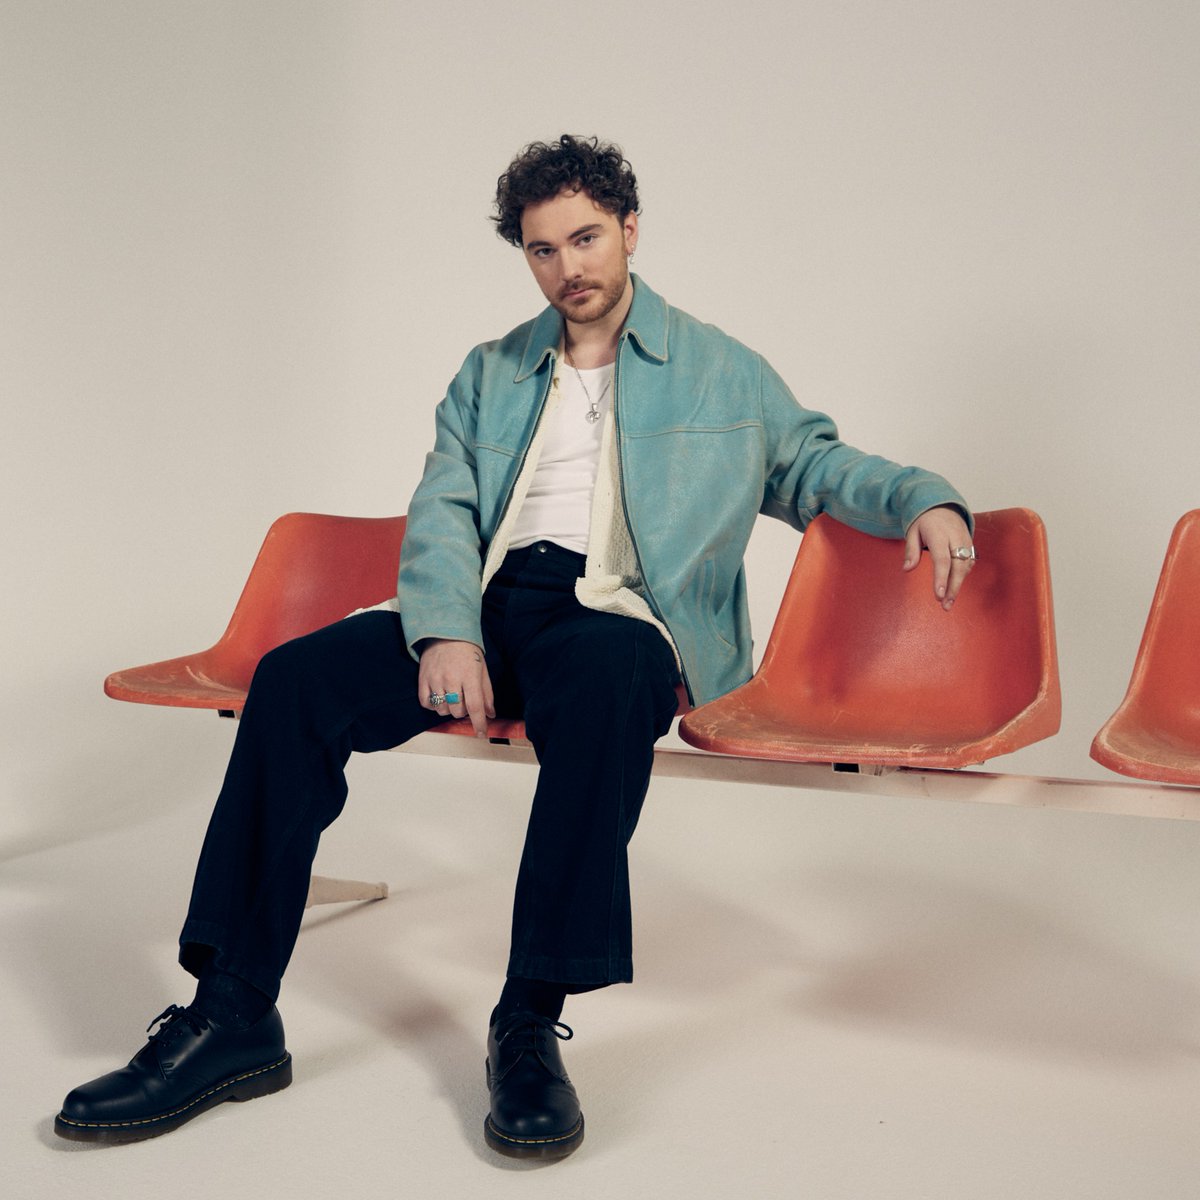 the keys? the vocals? hooked on @Cian_ducrot’s ~gorgeous~ new single “Here It Is” → yt.be/music/HereItI